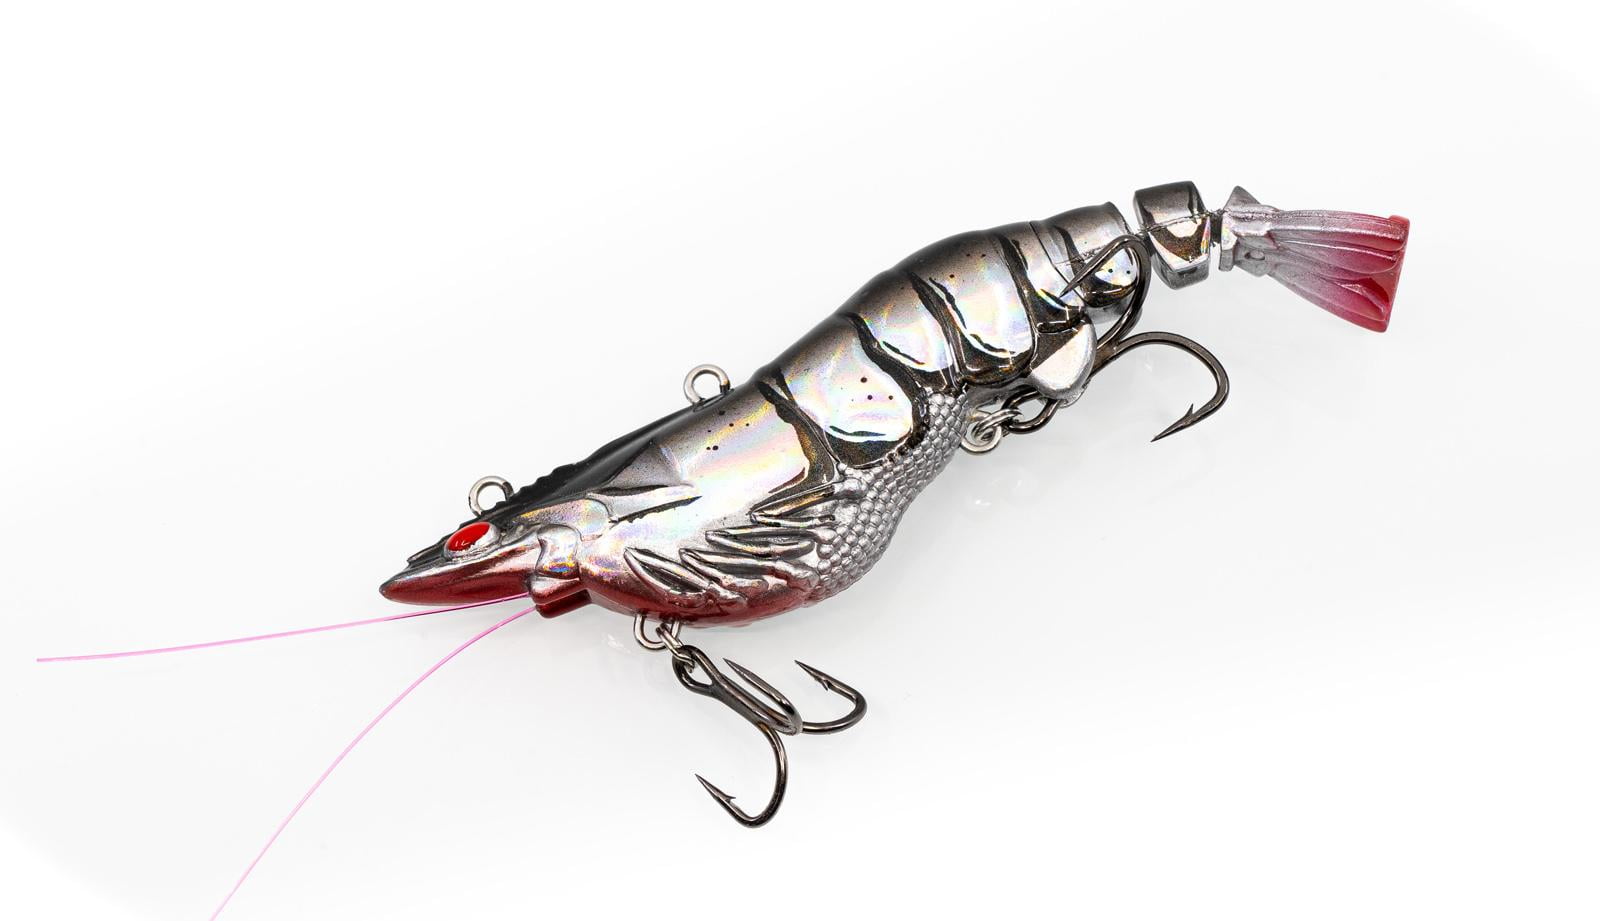 Lures Baits Attractants Spike Fishing